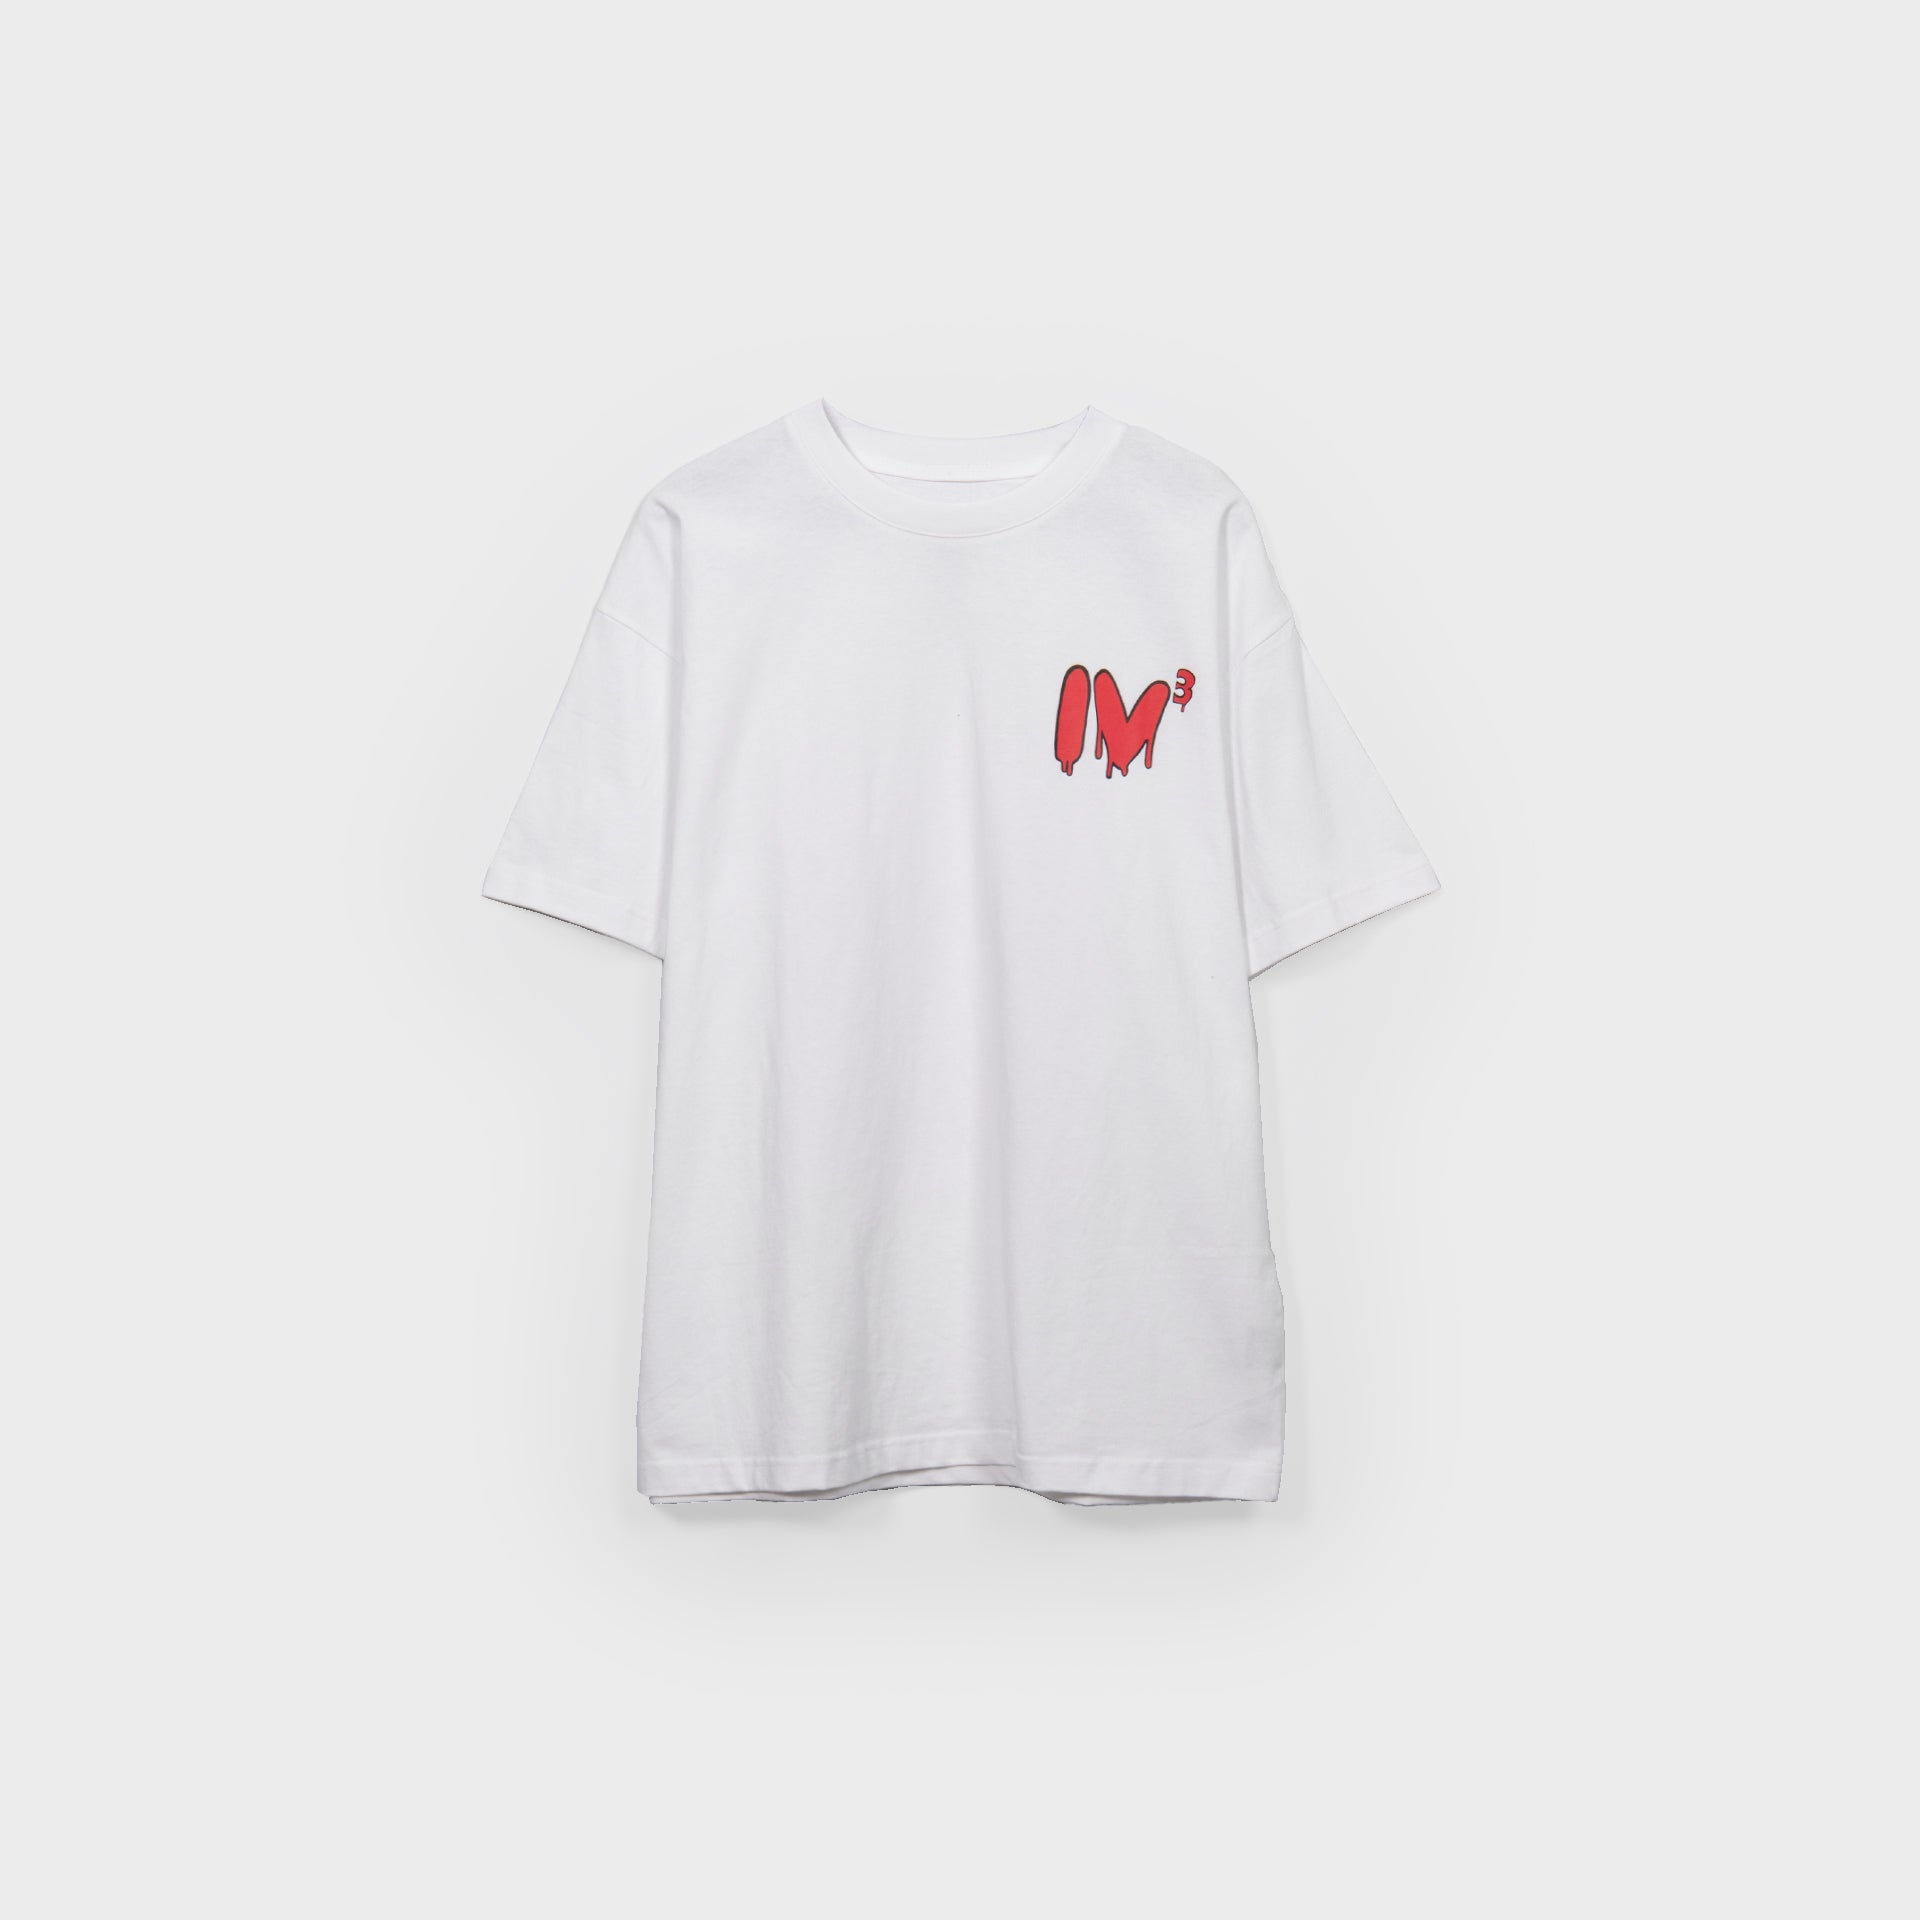 White "IV3" T-shirt From Triple Four